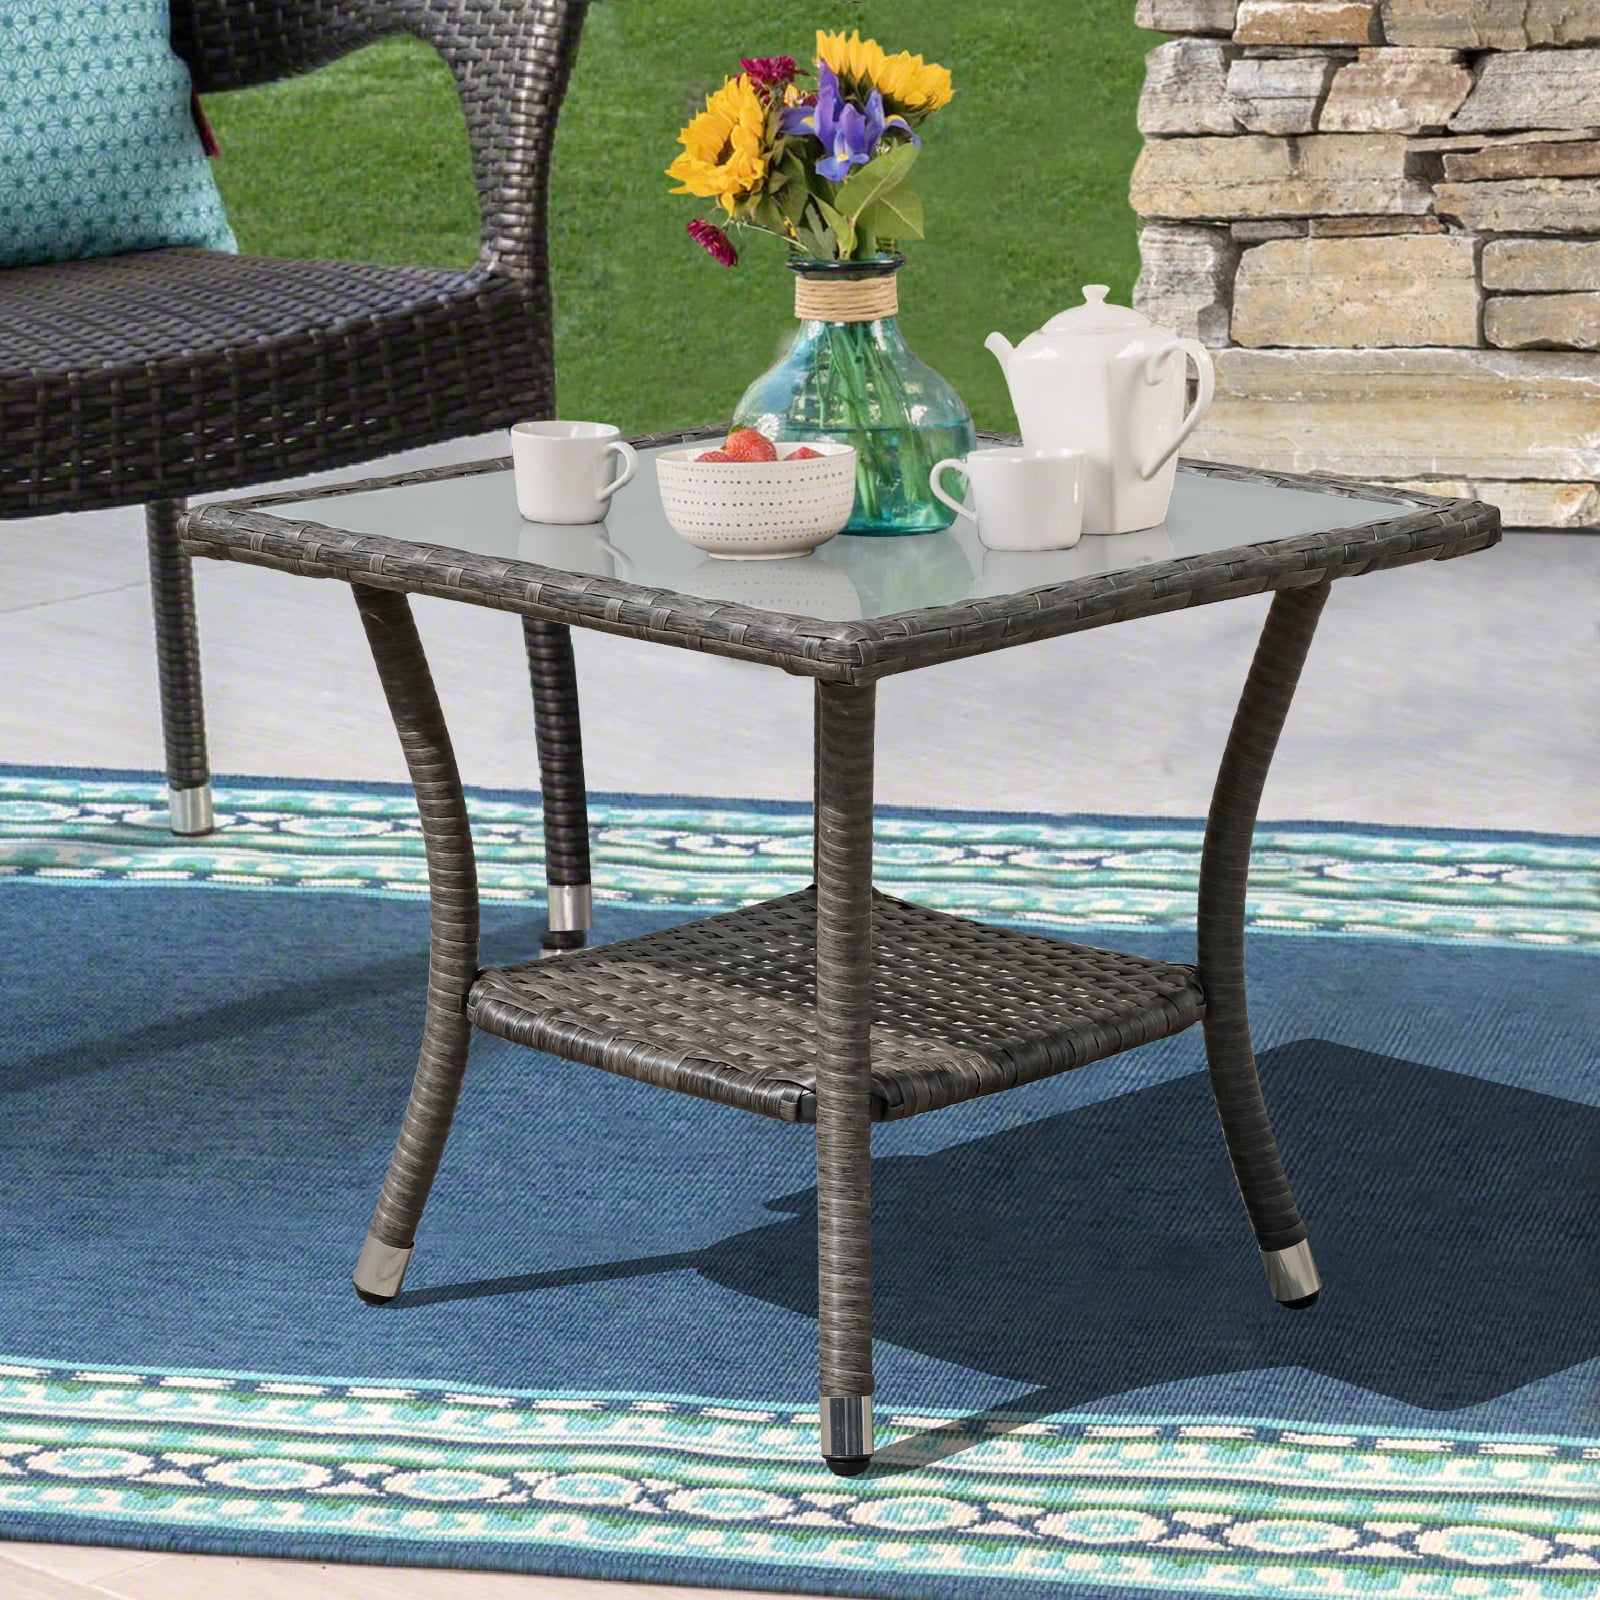 Rattan Coffee Table with Tempered Glass Top Indoor Garden Bistro Table Decoration Patio Wicker Side Table Outdoor 